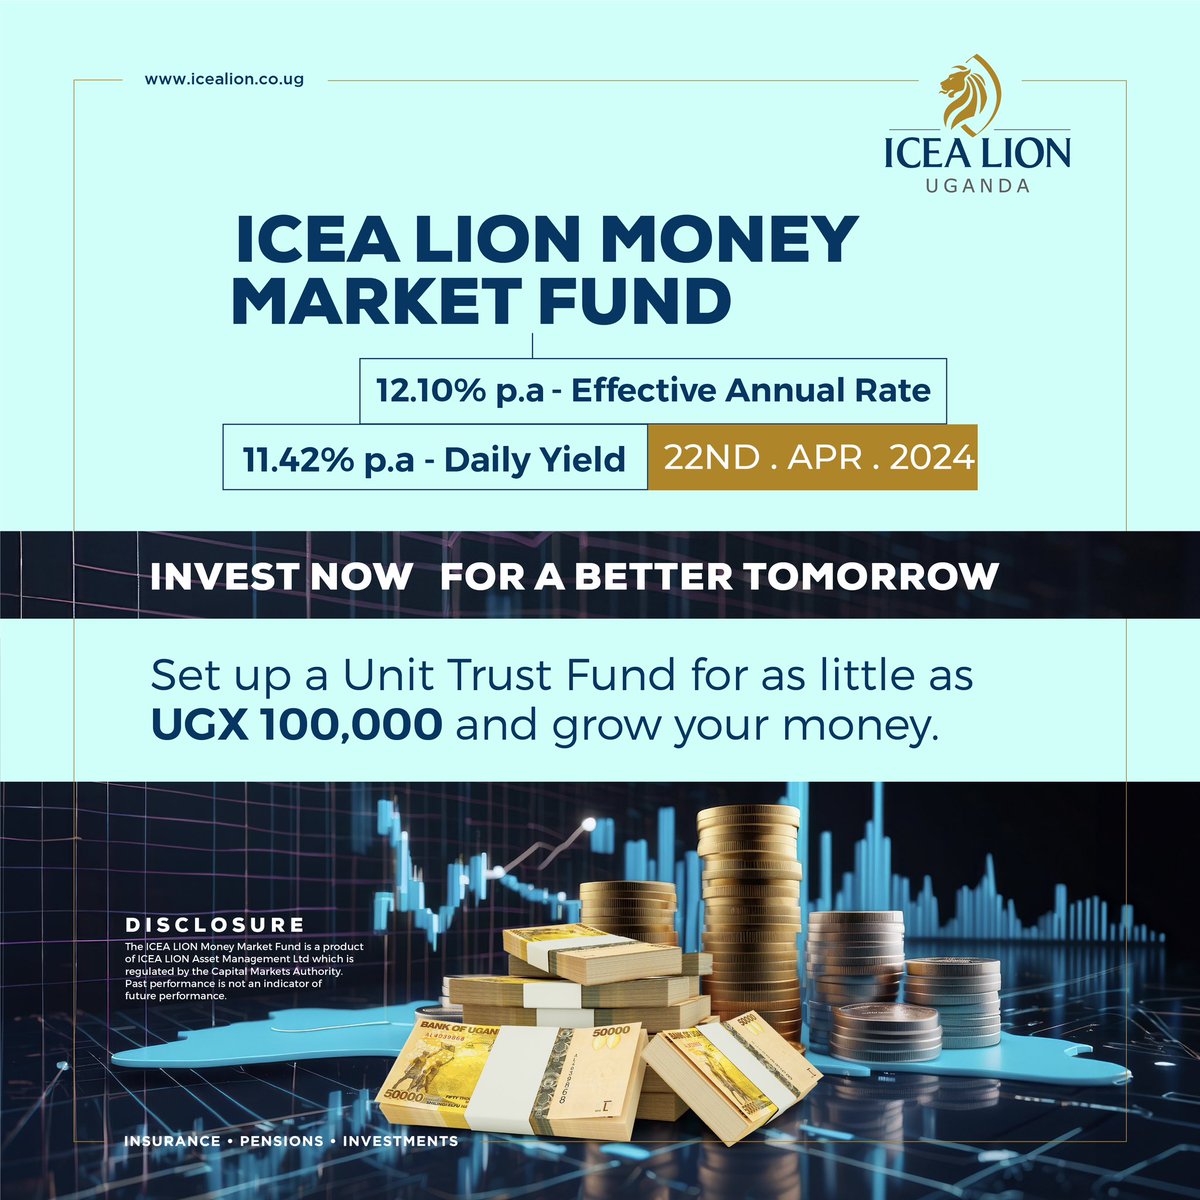 Start investing in the #ICEALIONUnitTrusts with as little as UGX 100,000 and watch your money grow. It's very practical and achievable 😎 #ICEALIONUg | Start Now